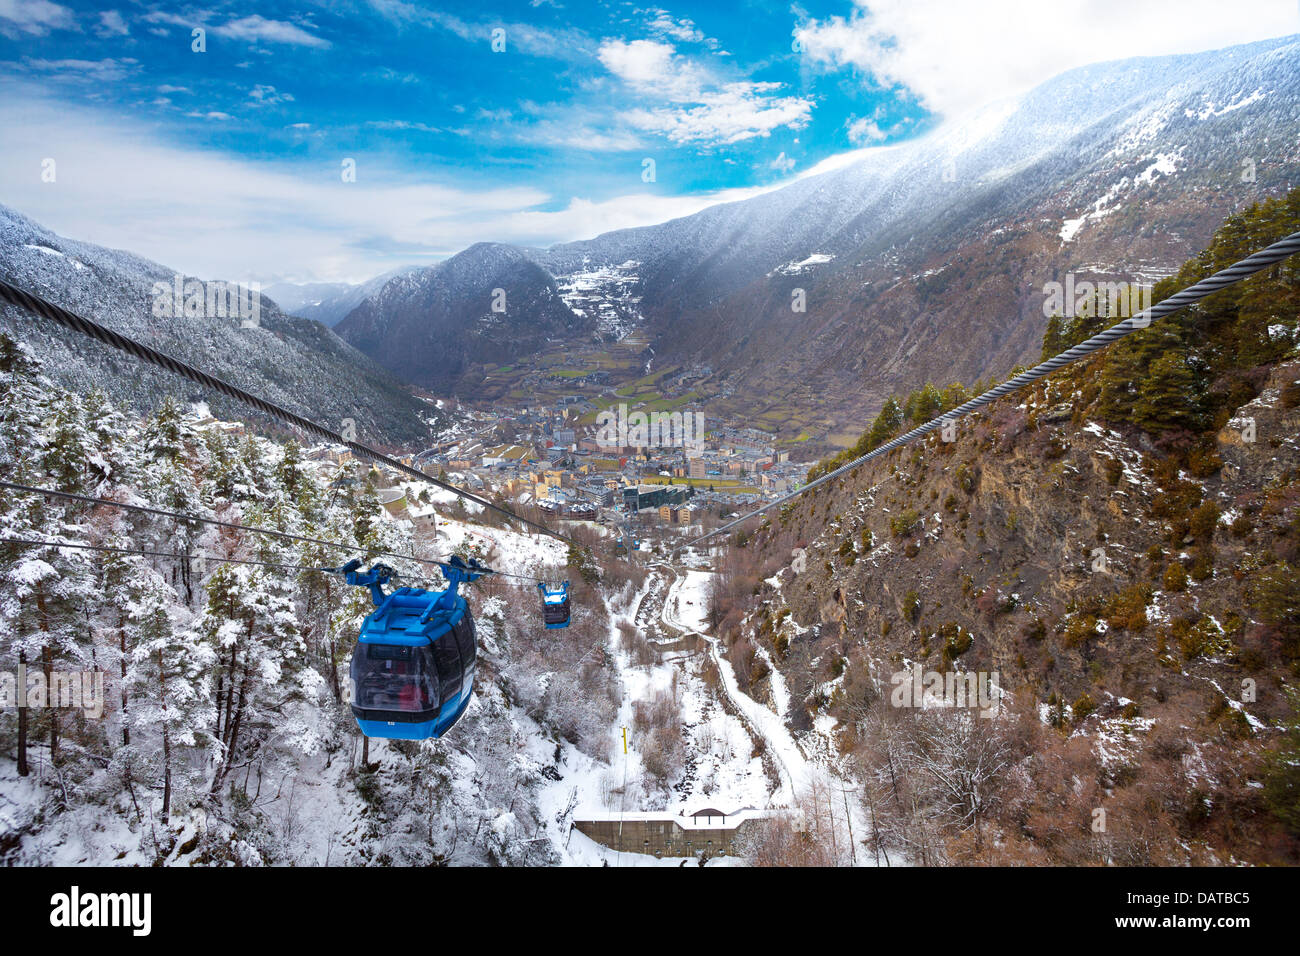 Encamp town in Andorra and cable car for lifting skiers and snowboarders to the top of the mountain Stock Photo